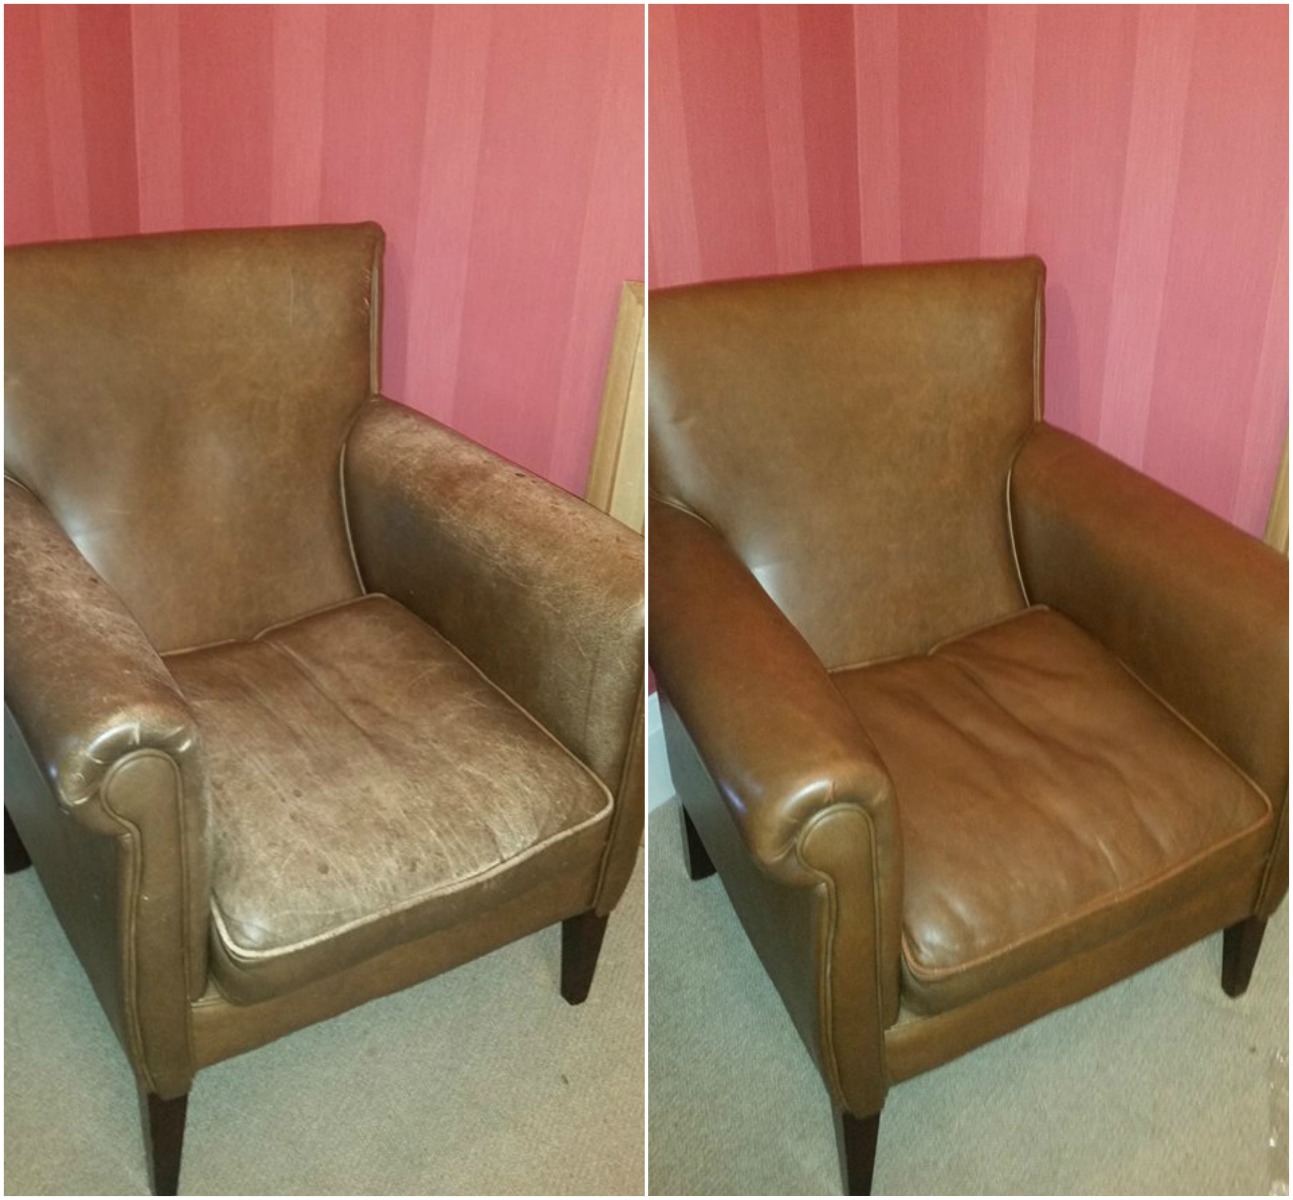 Restoring Colour To A Faded Leather Sofa, Refurbish Leather Chair